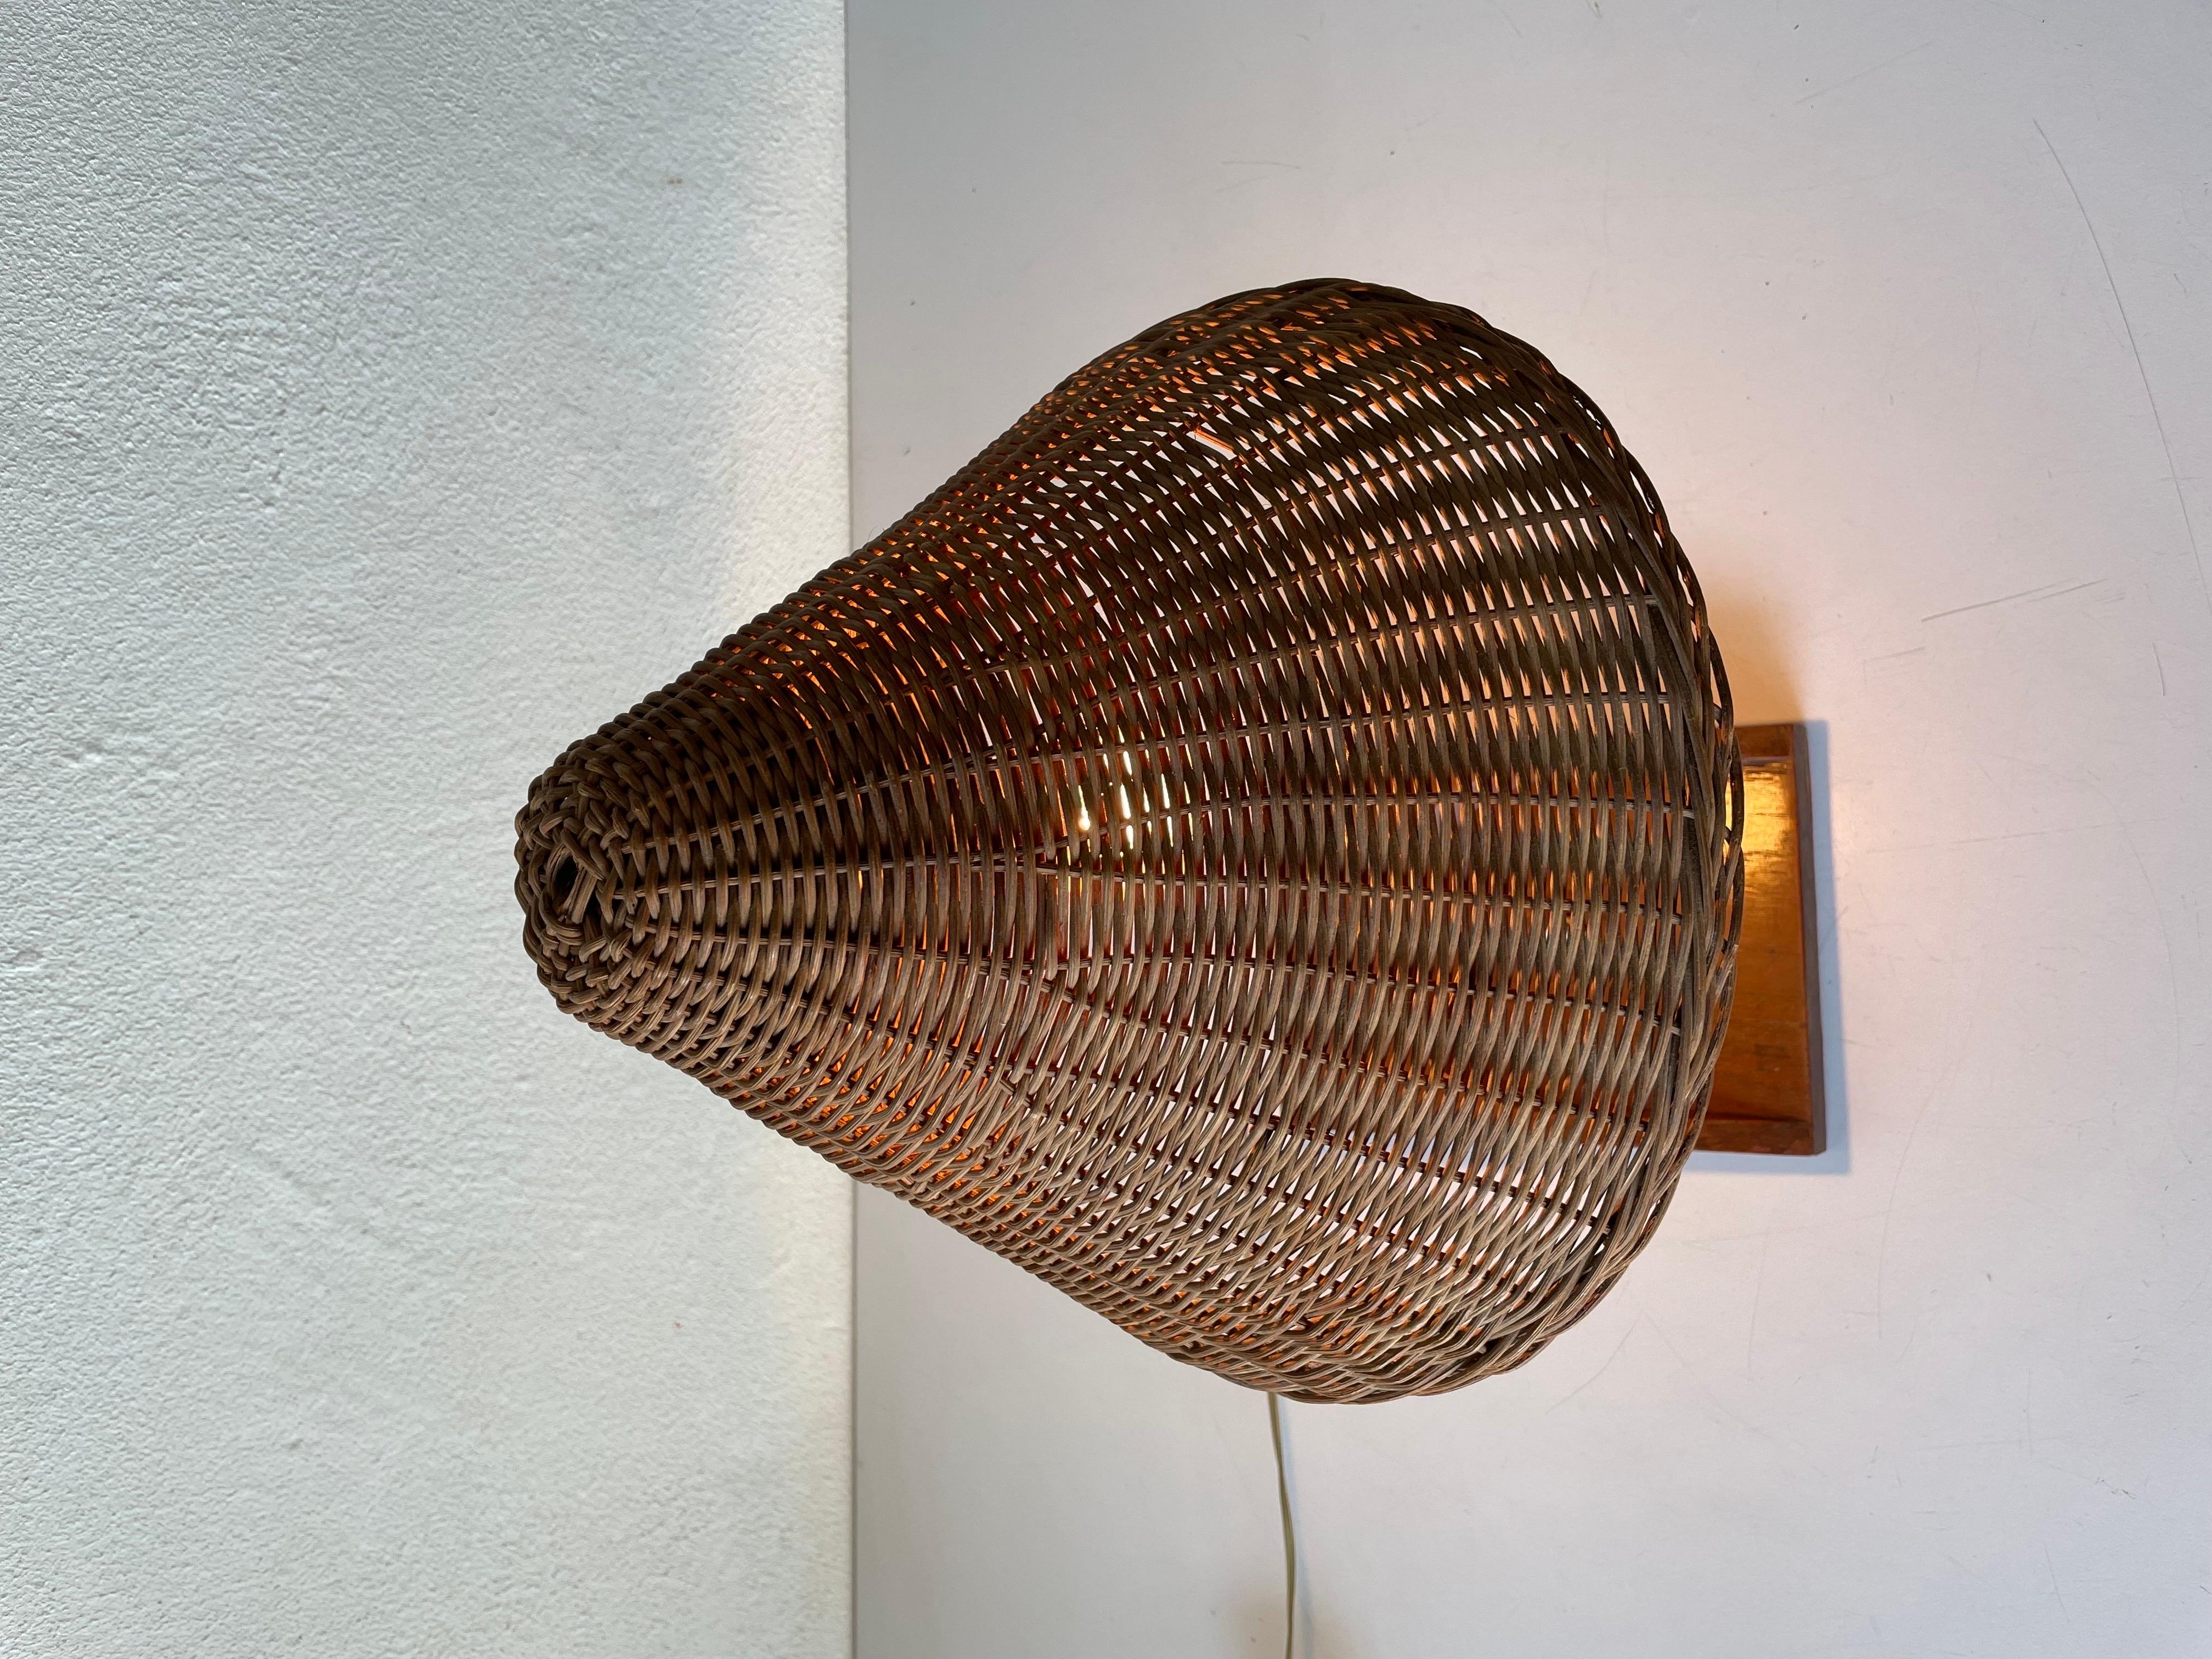 Mid-century Wicker & Wood Desk Lamp, 1950s, Italy For Sale 8